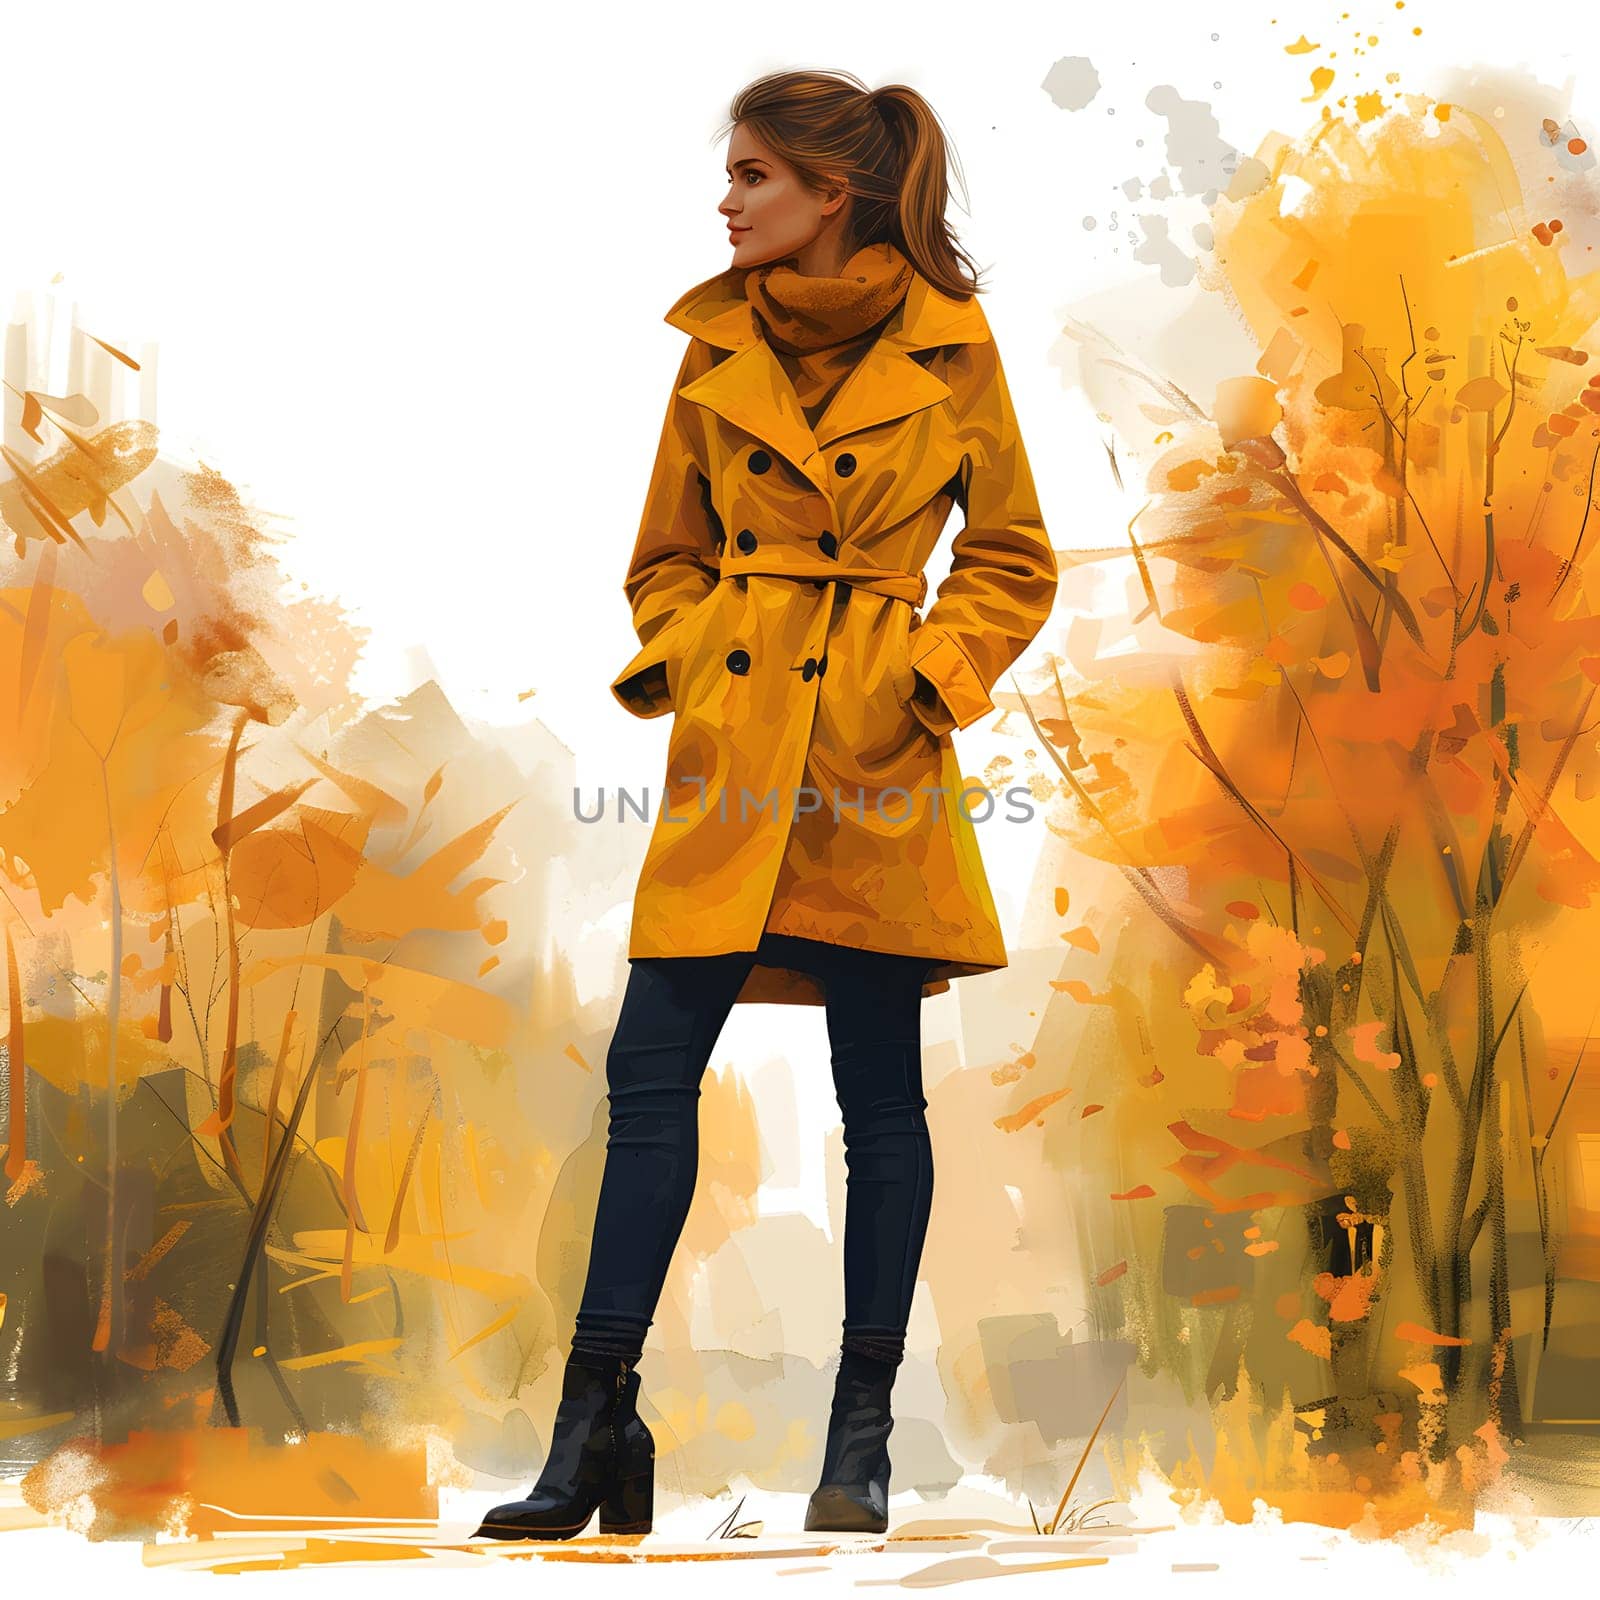 A woman in a bright yellow trench coat is surrounded by trees and grass, basking in the sunlight. The scene is so happy and colorful, it looks like a painting with vibrant tints and shades of orange